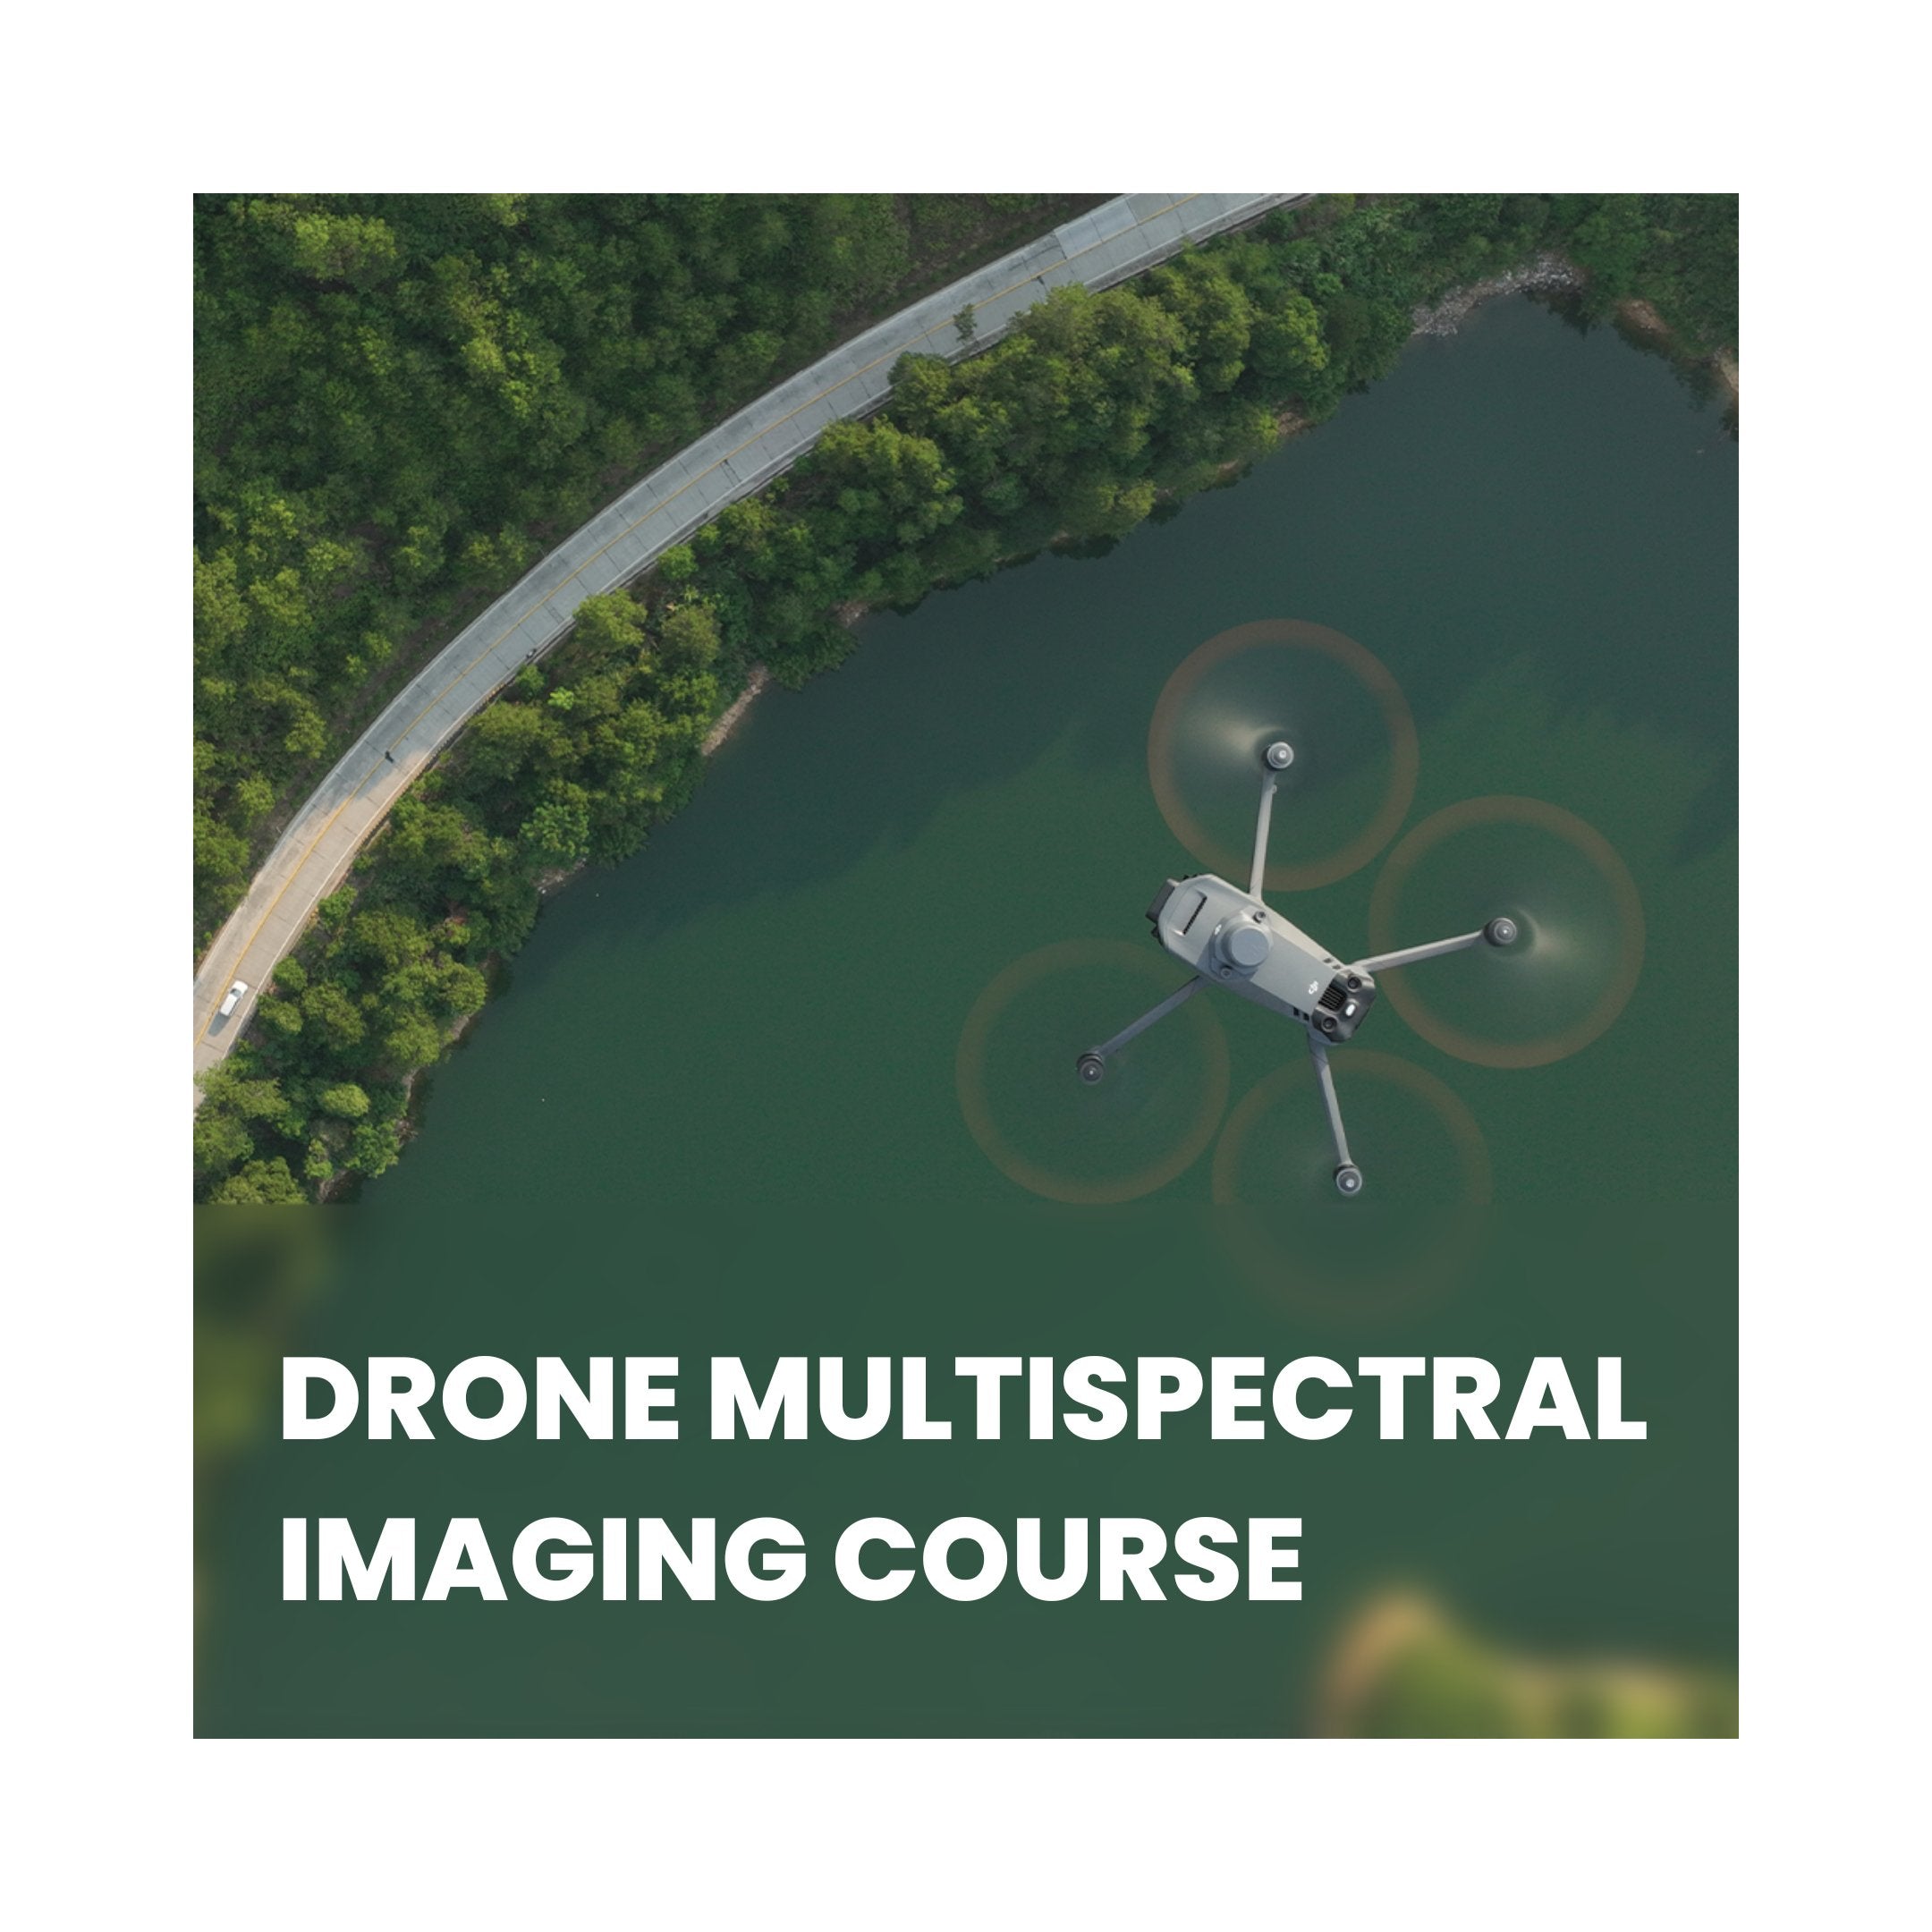 Drone Multispectral Imaging Course - iRed Limited